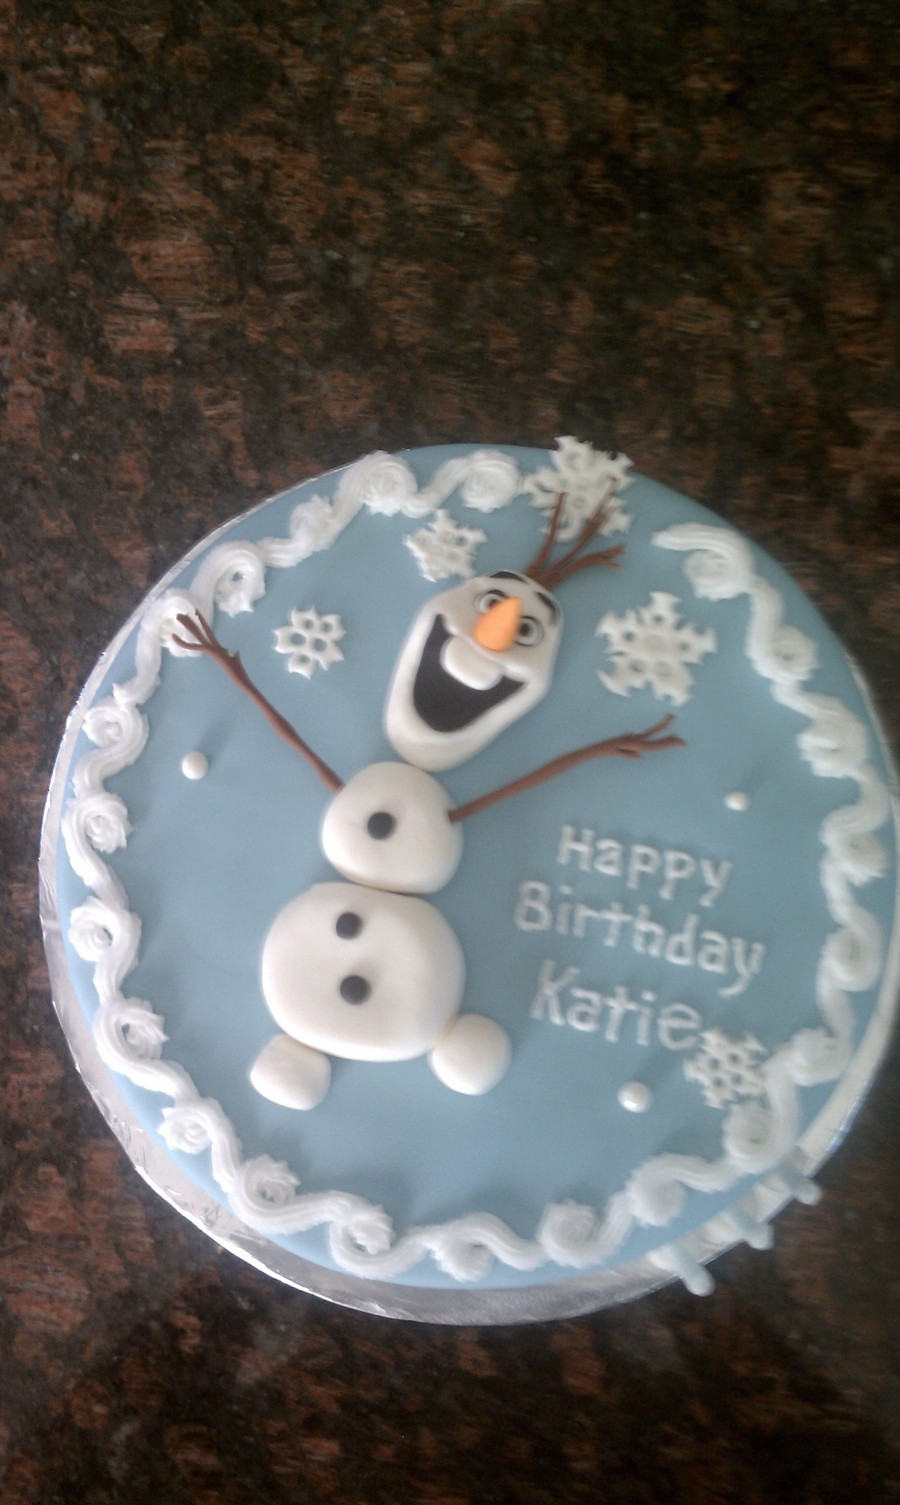 3 Year Old Birthday Cake
 Birthday Cake For A 3 Year Old Who Loves Frozen